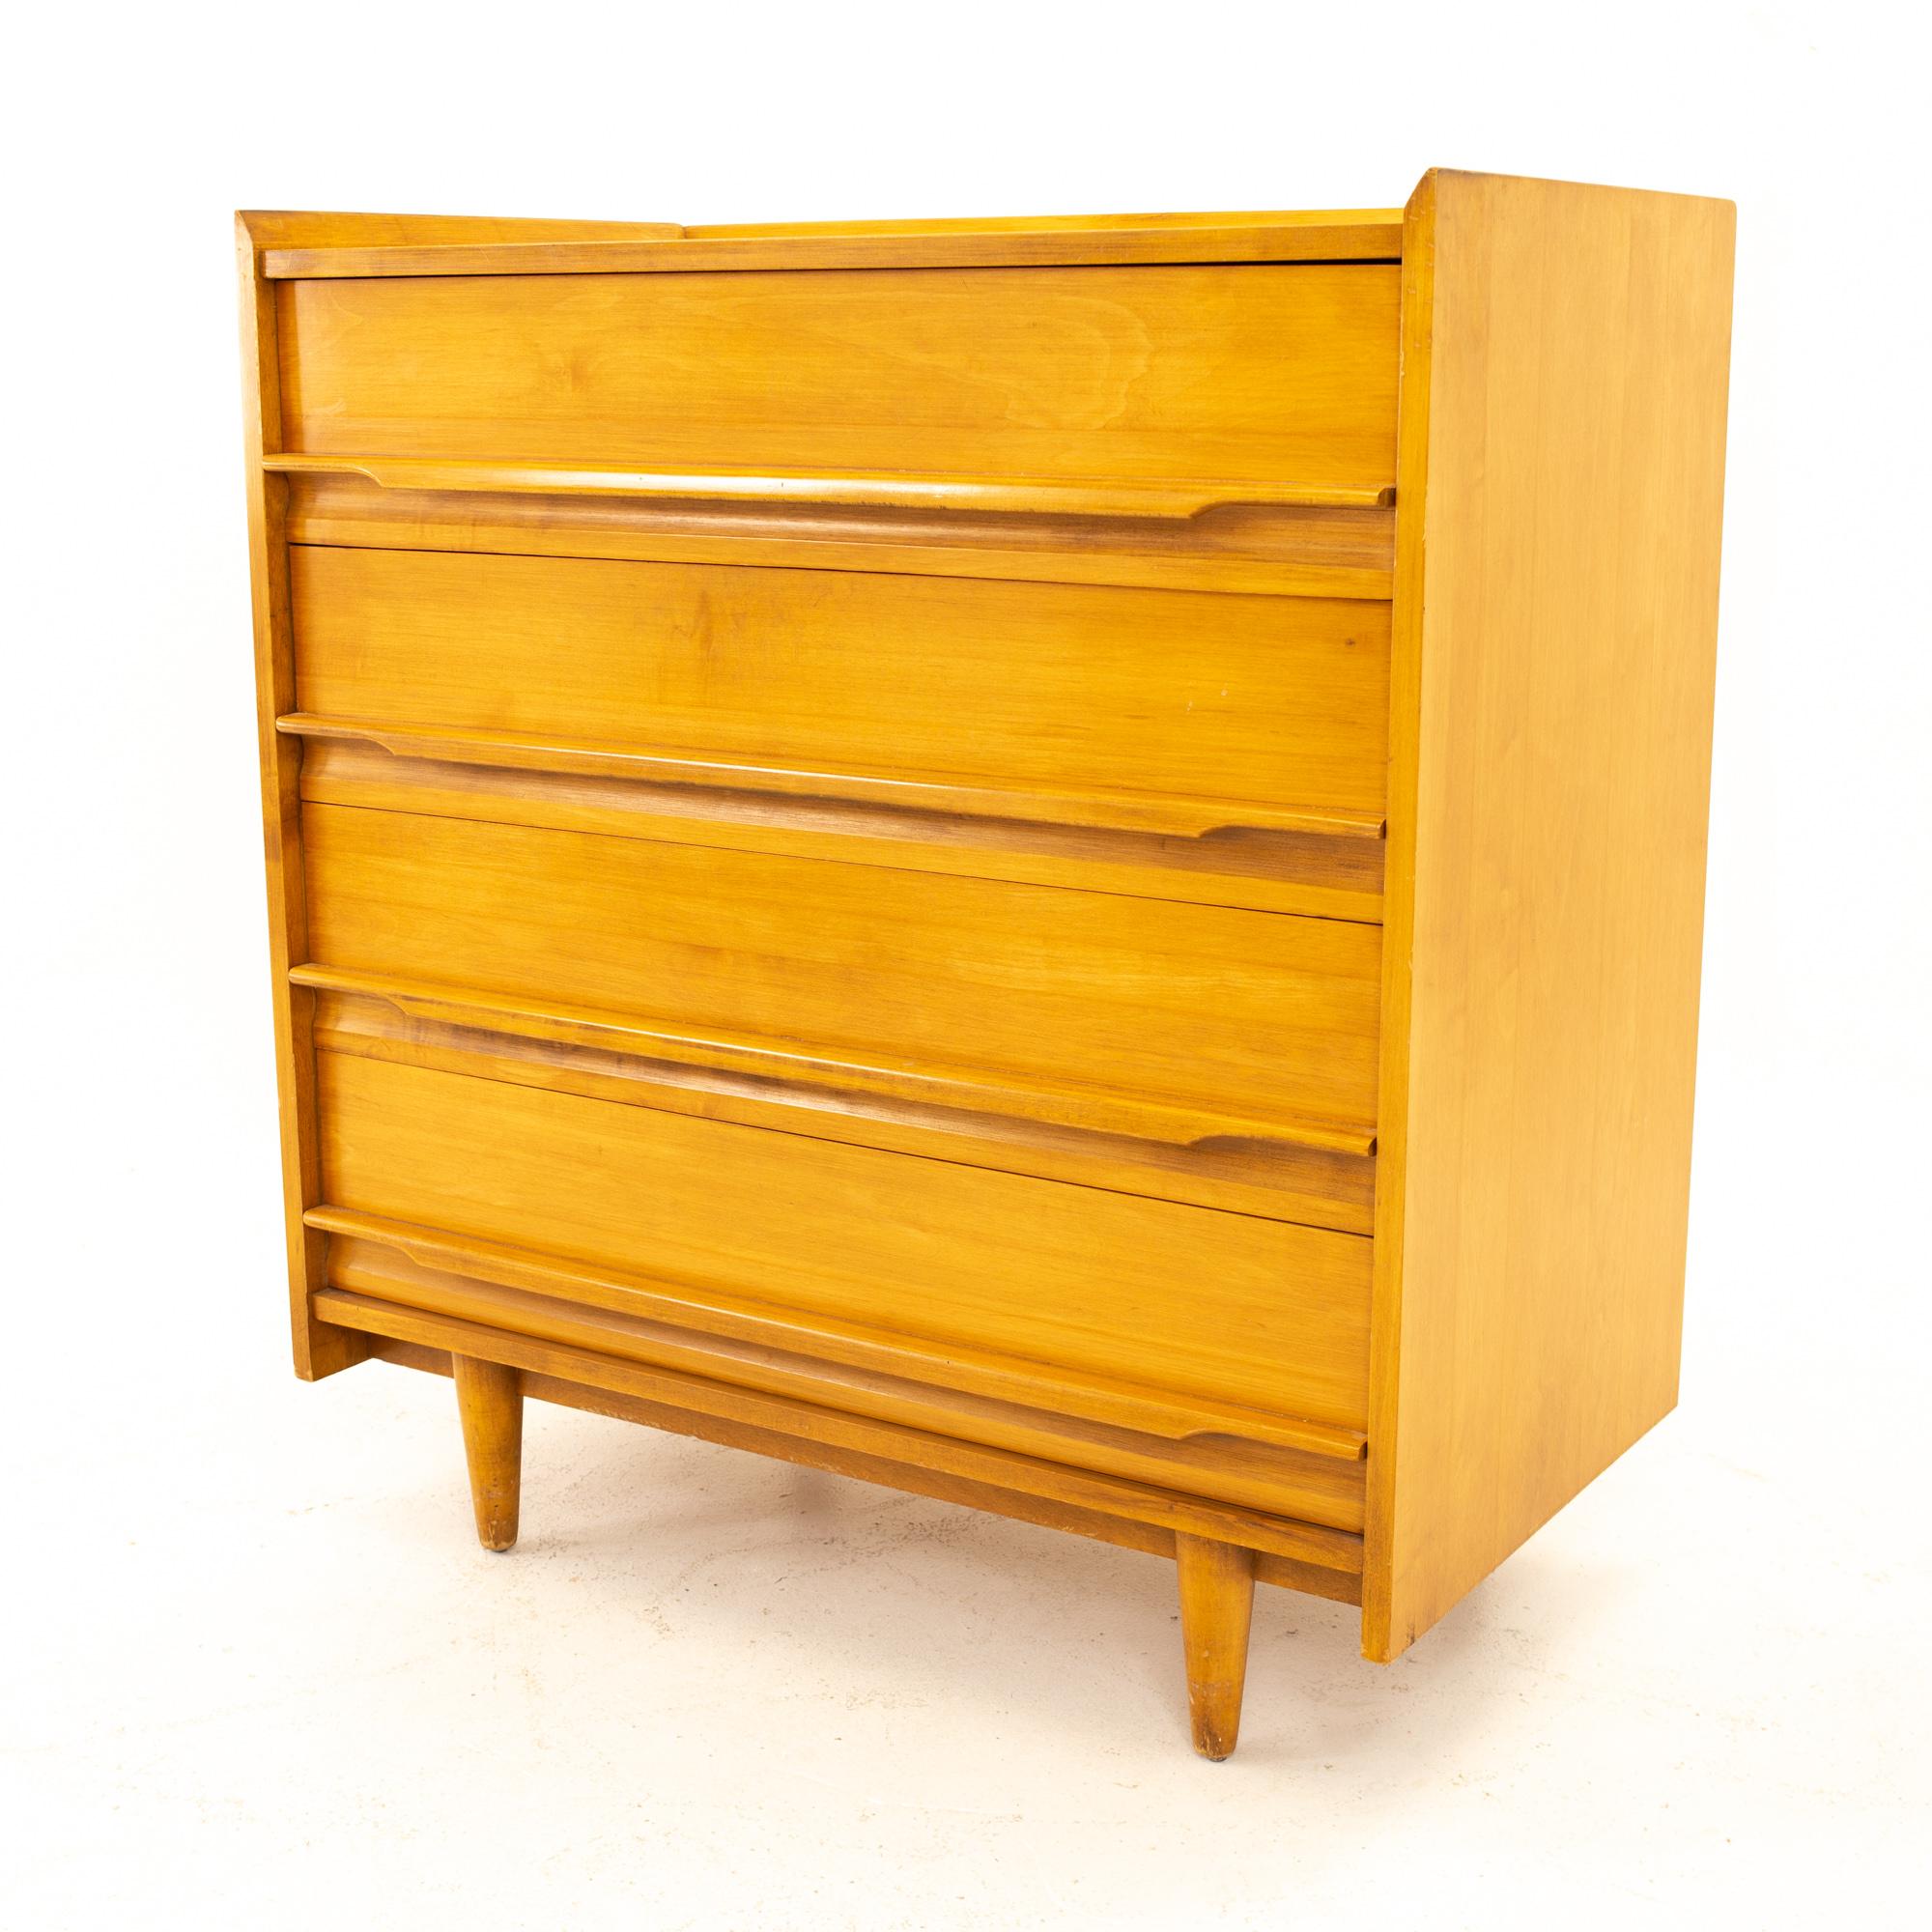 Milo Baughman style Crawford mid century 4 drawer highboy dresser.
Dresser measures: 34 wide x 19 deep x 36 high

All pieces of furniture can be had in what we call restored vintage condition. That means the piece is restored upon purchase so